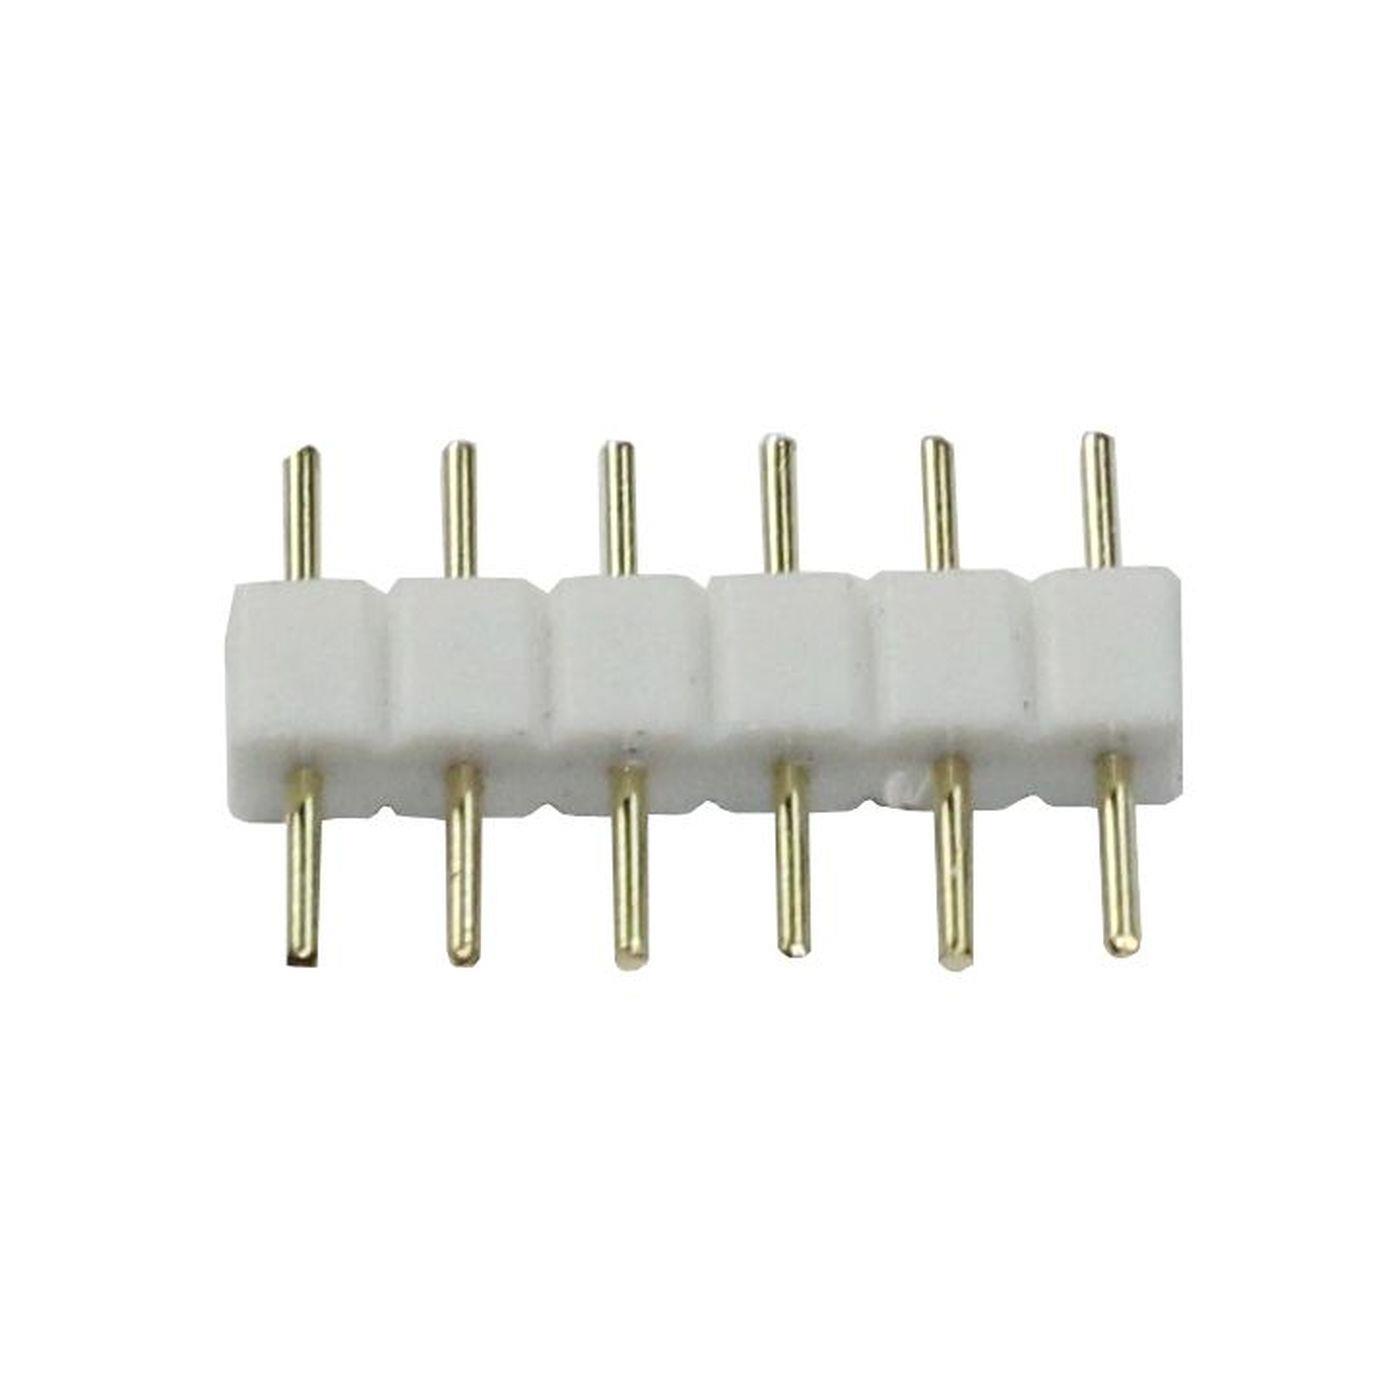 10x RGBW CCT LED Jumper 6 Pin Connector 15x3mm Adapter Coupling